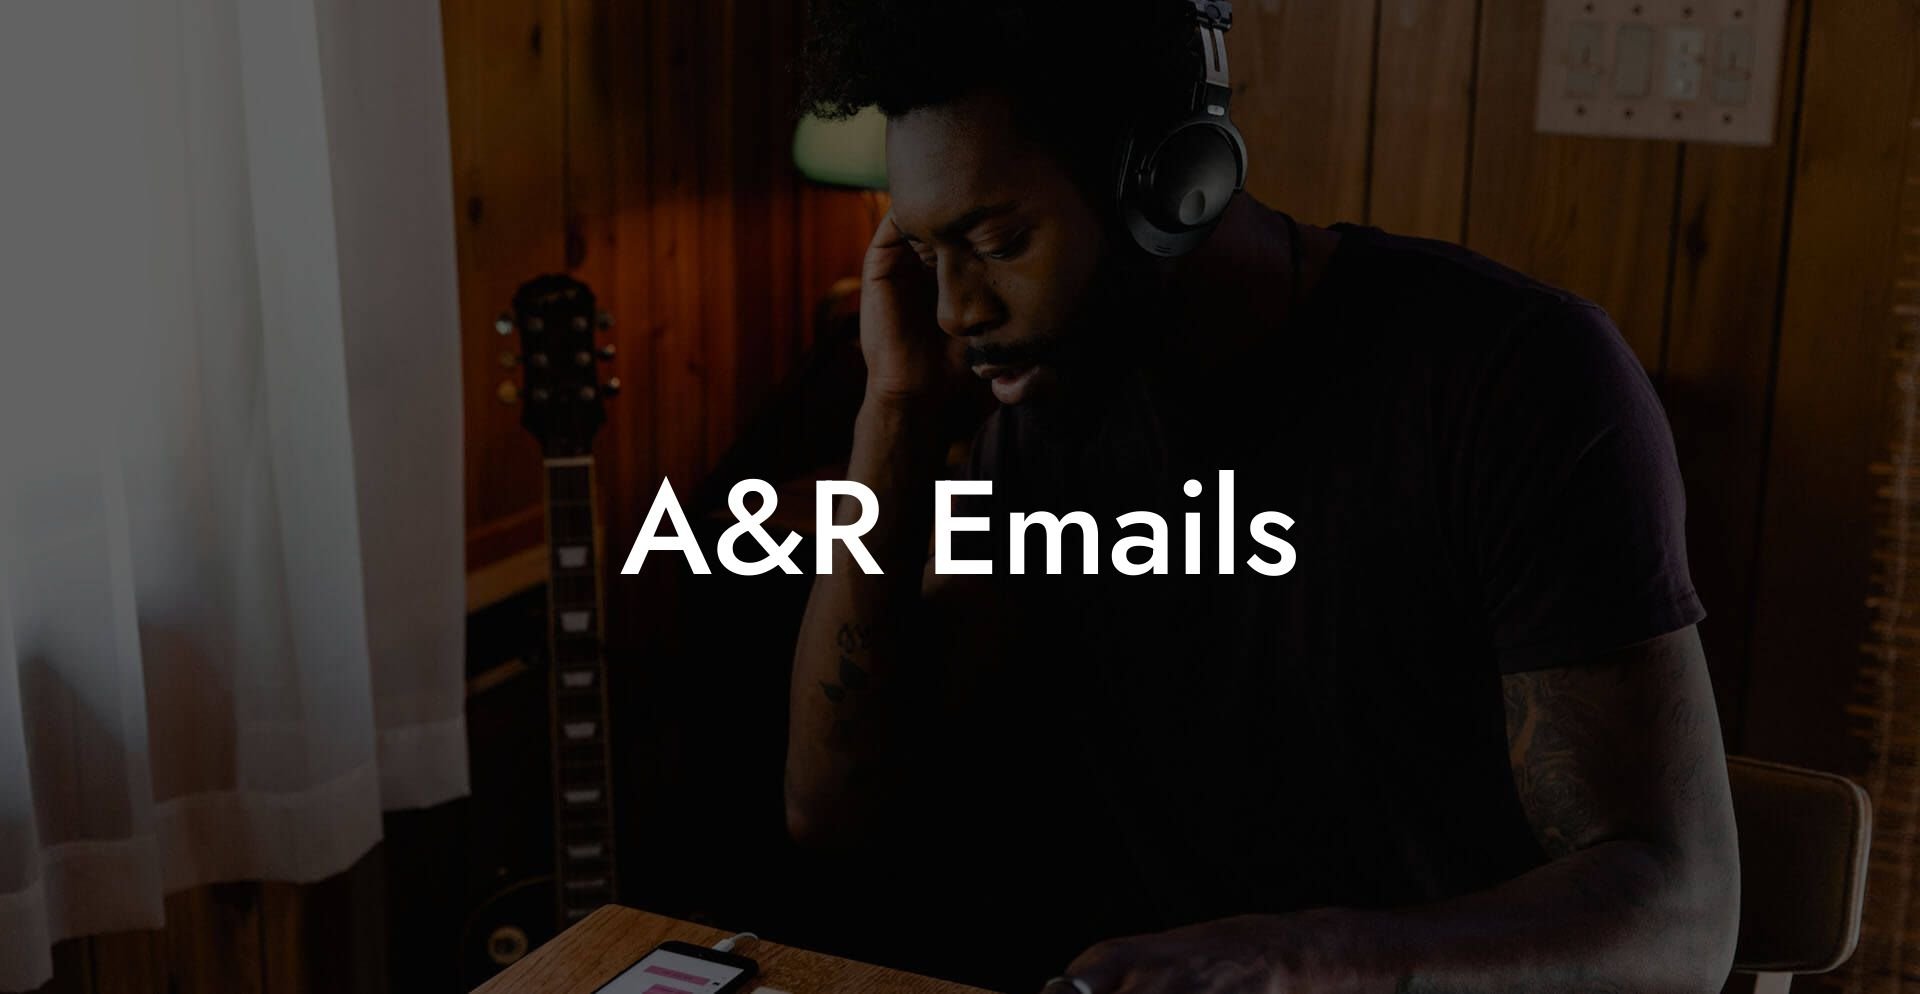 A&R Emails